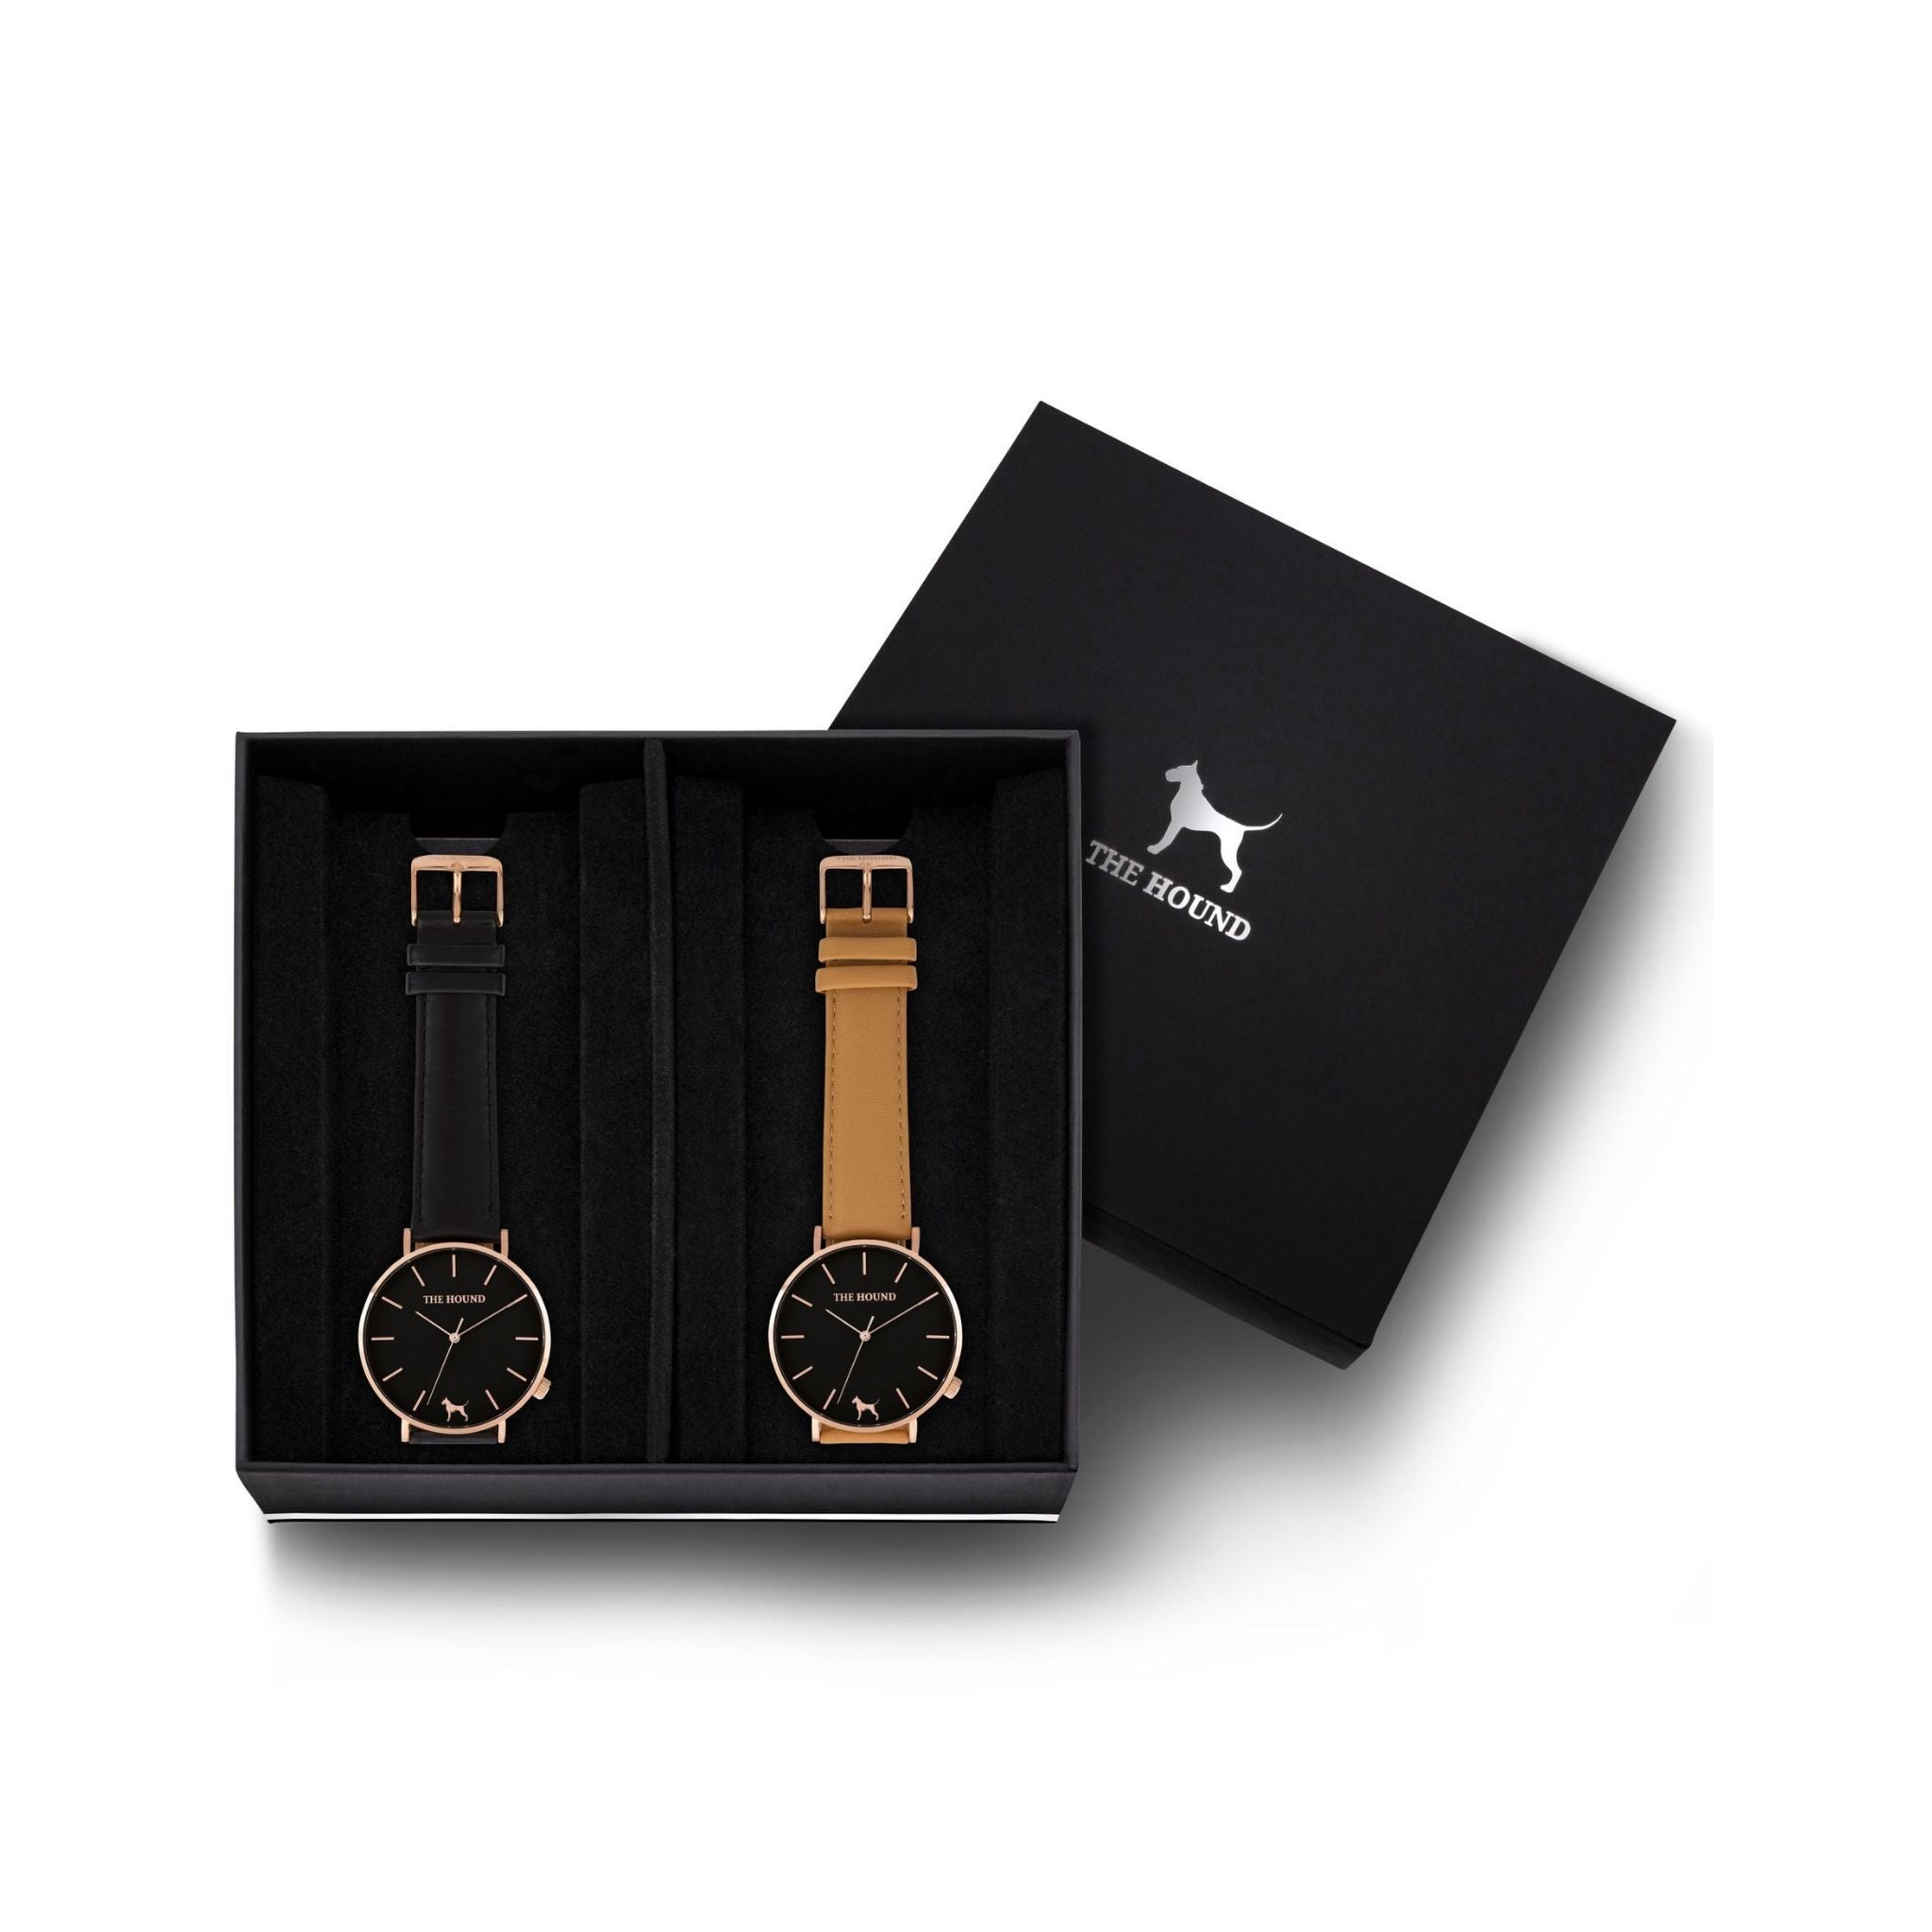 Custom gift set - Rose gold and black watch with stitched black genuine leather band and a rose gold and black watch with stitched camel genuine leather band